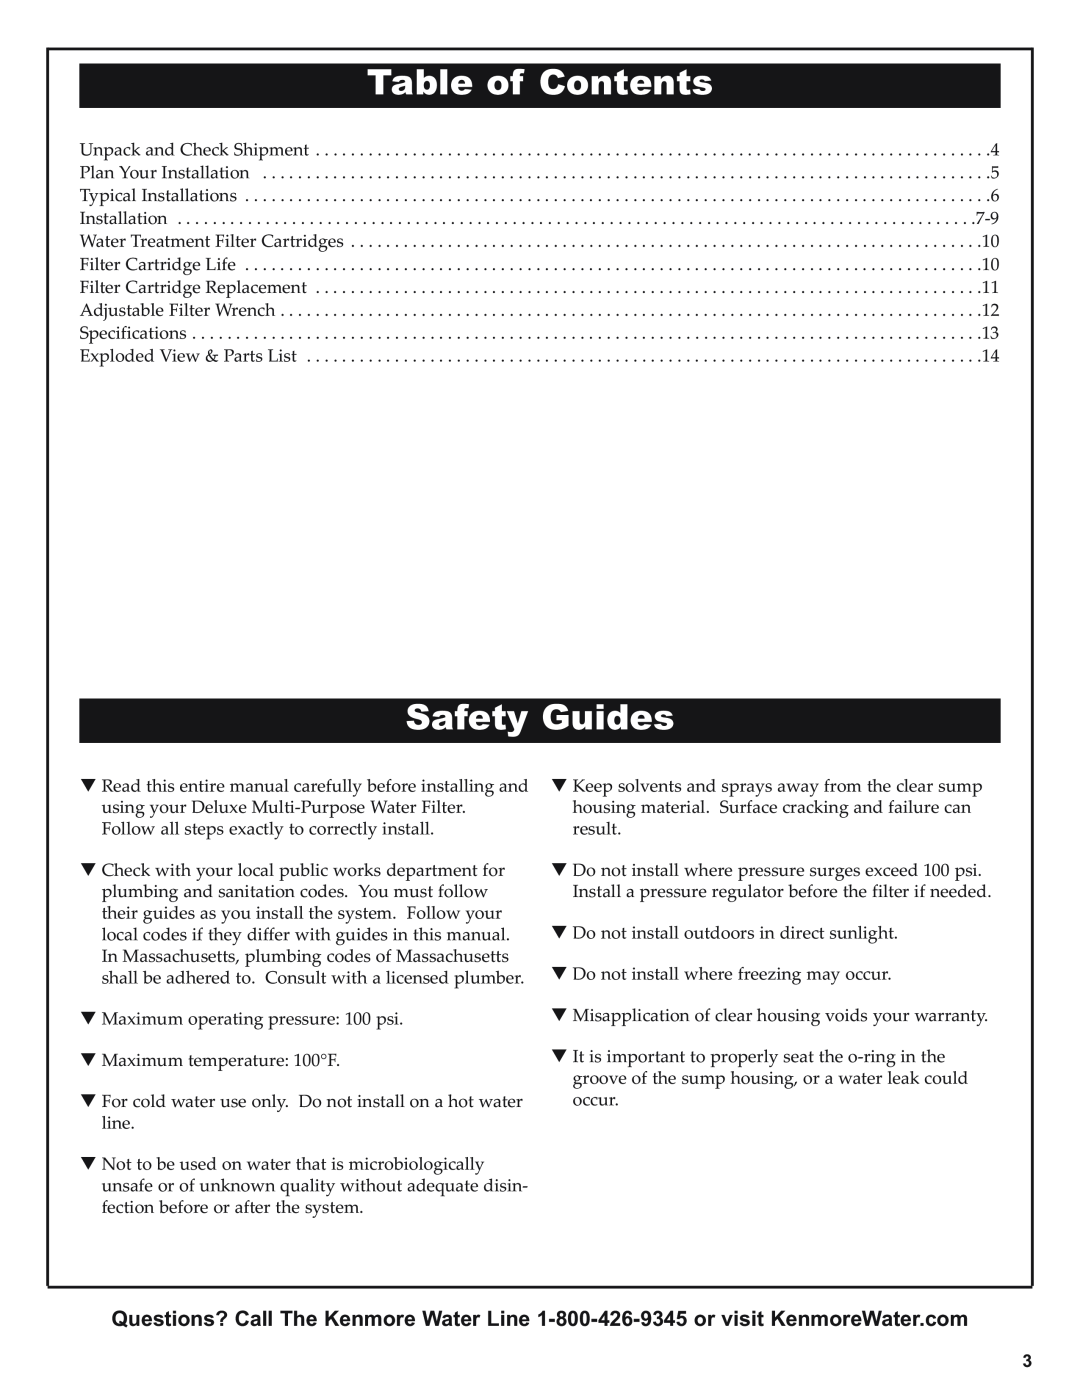 Kenmore 625.38445 owner manual Table of Contents, Safety Guides 